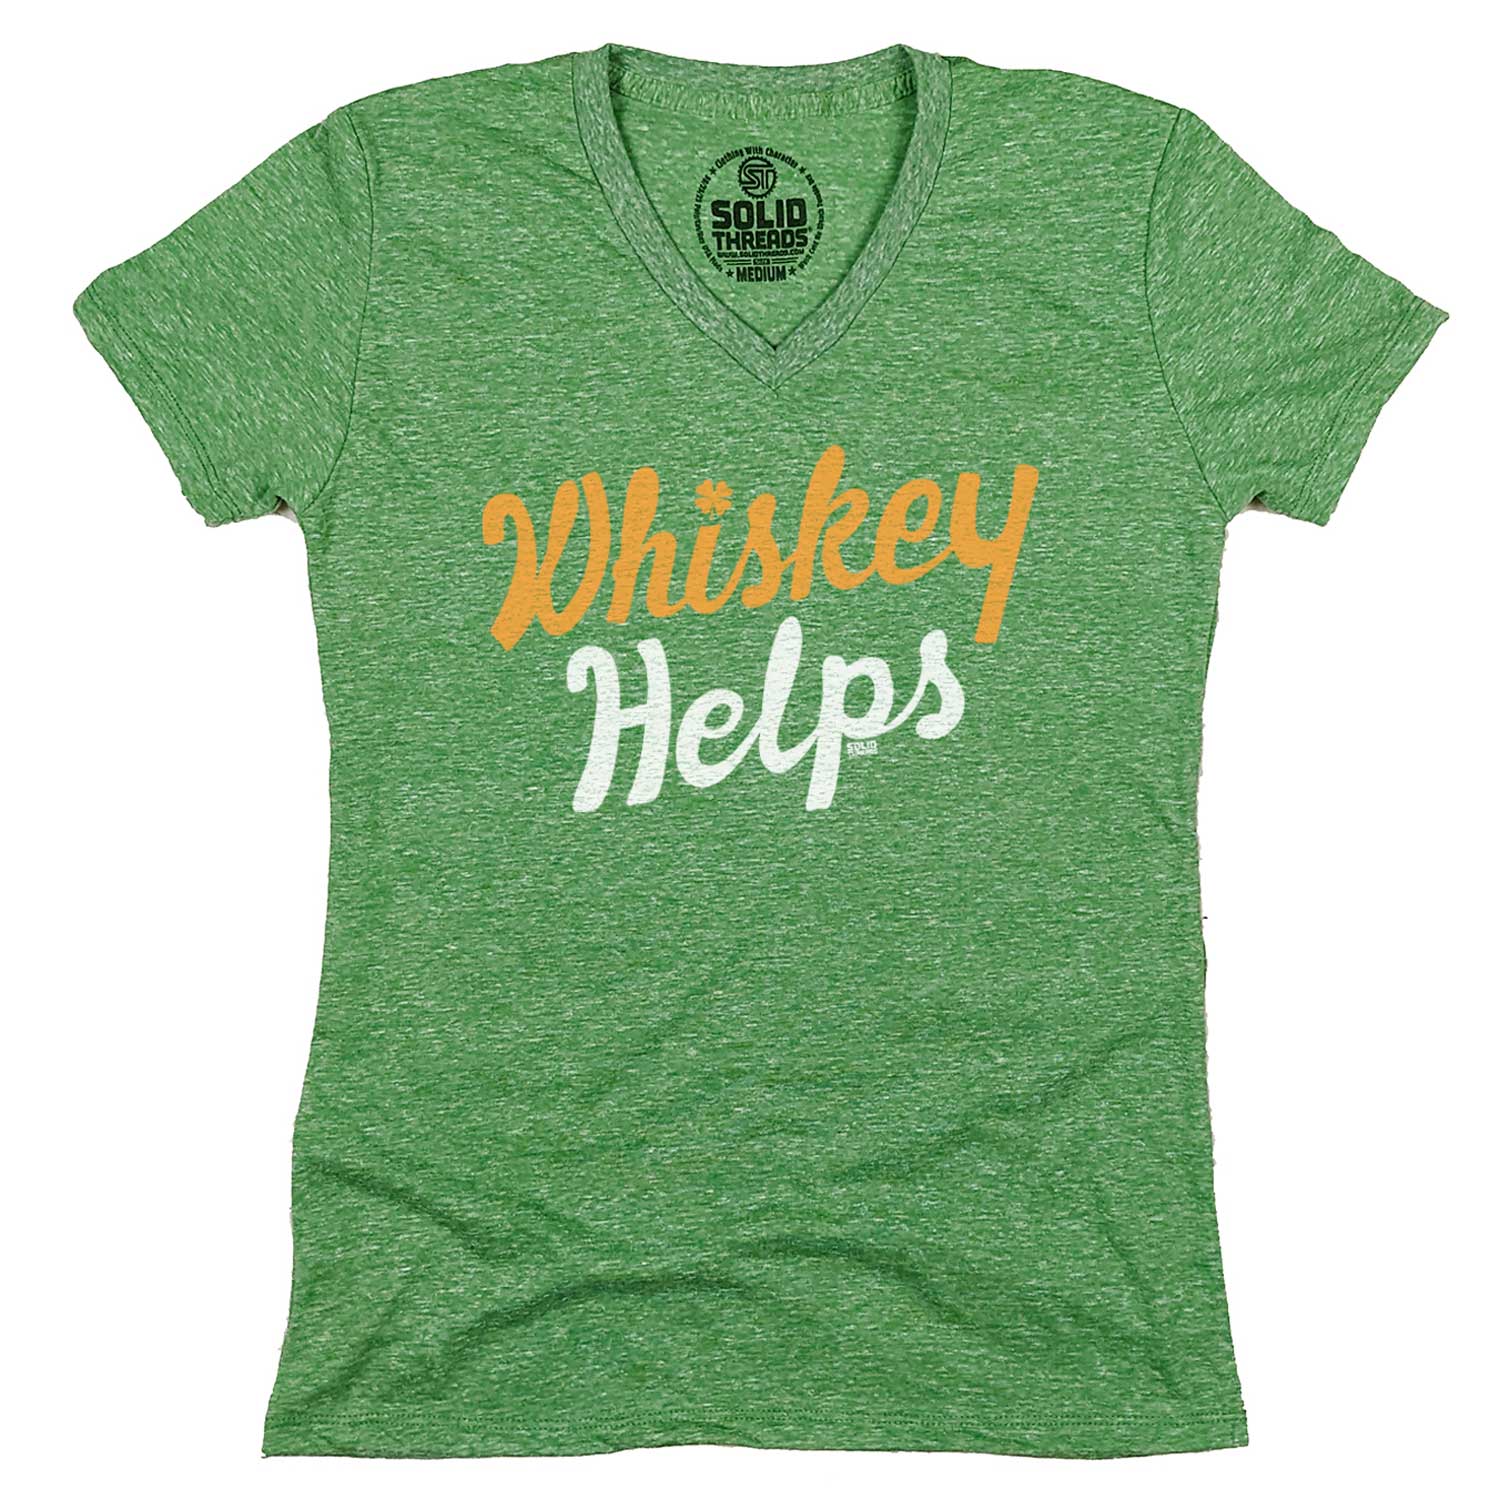 Women's Irish Whiskey Helps Vintage Graphic V-Neck Tee | Funny St. Paddy's T-shirt | Solid Threads